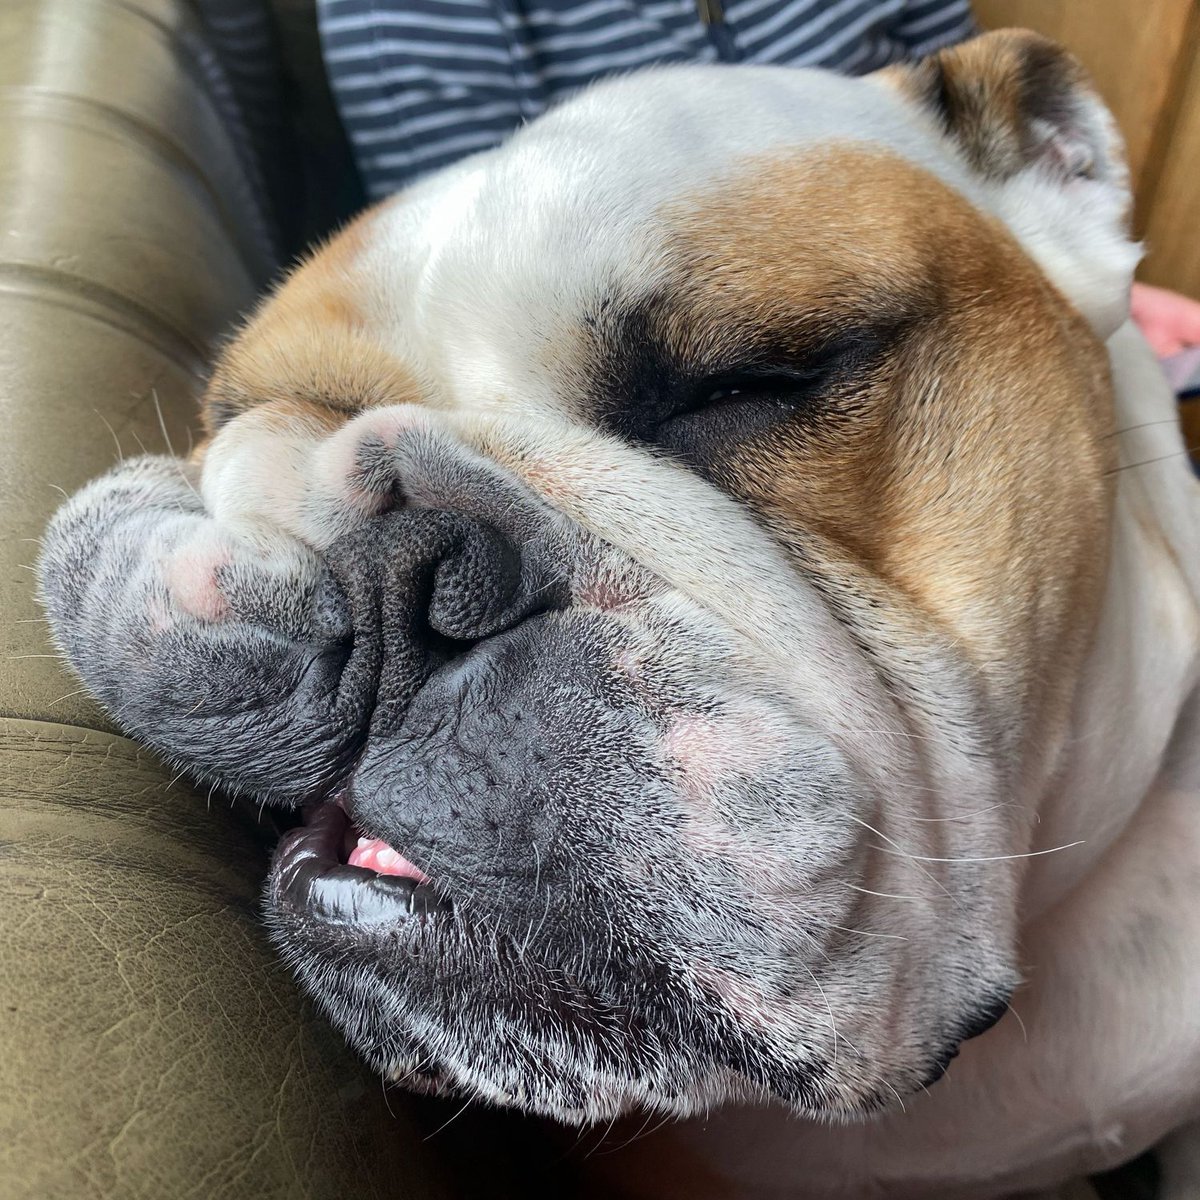 One trip to the pub too many on my weekend away, we’re back home now but I can’t keep my eyes open - just as well it’s #WontLookWednesday 👀 💤 🐶🐾❤️ Barney #BarneyTheBulldog #DogsOfTwitter #DogsOfX #DogsOfIG #DogsOfFacebook #Bulldog #EnglishBulldog #WLW #Wednesday